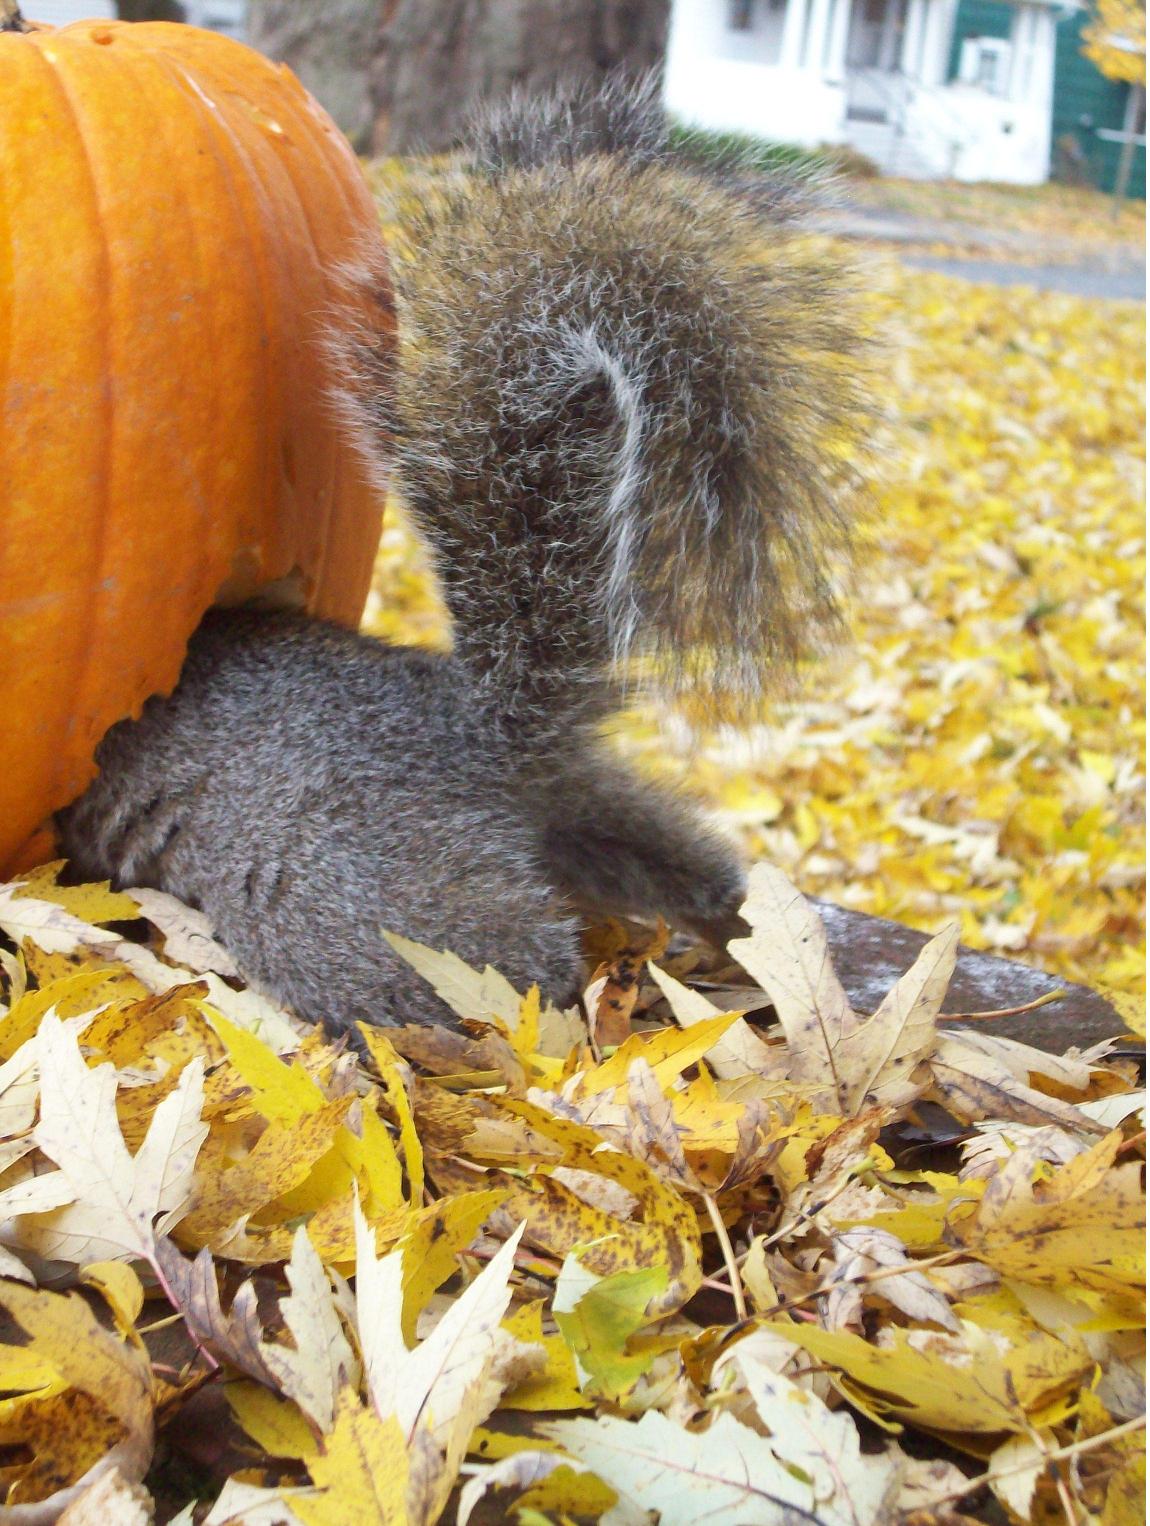 The Pumpkin And The Squirrel In Bennington, Vt (user submitted)